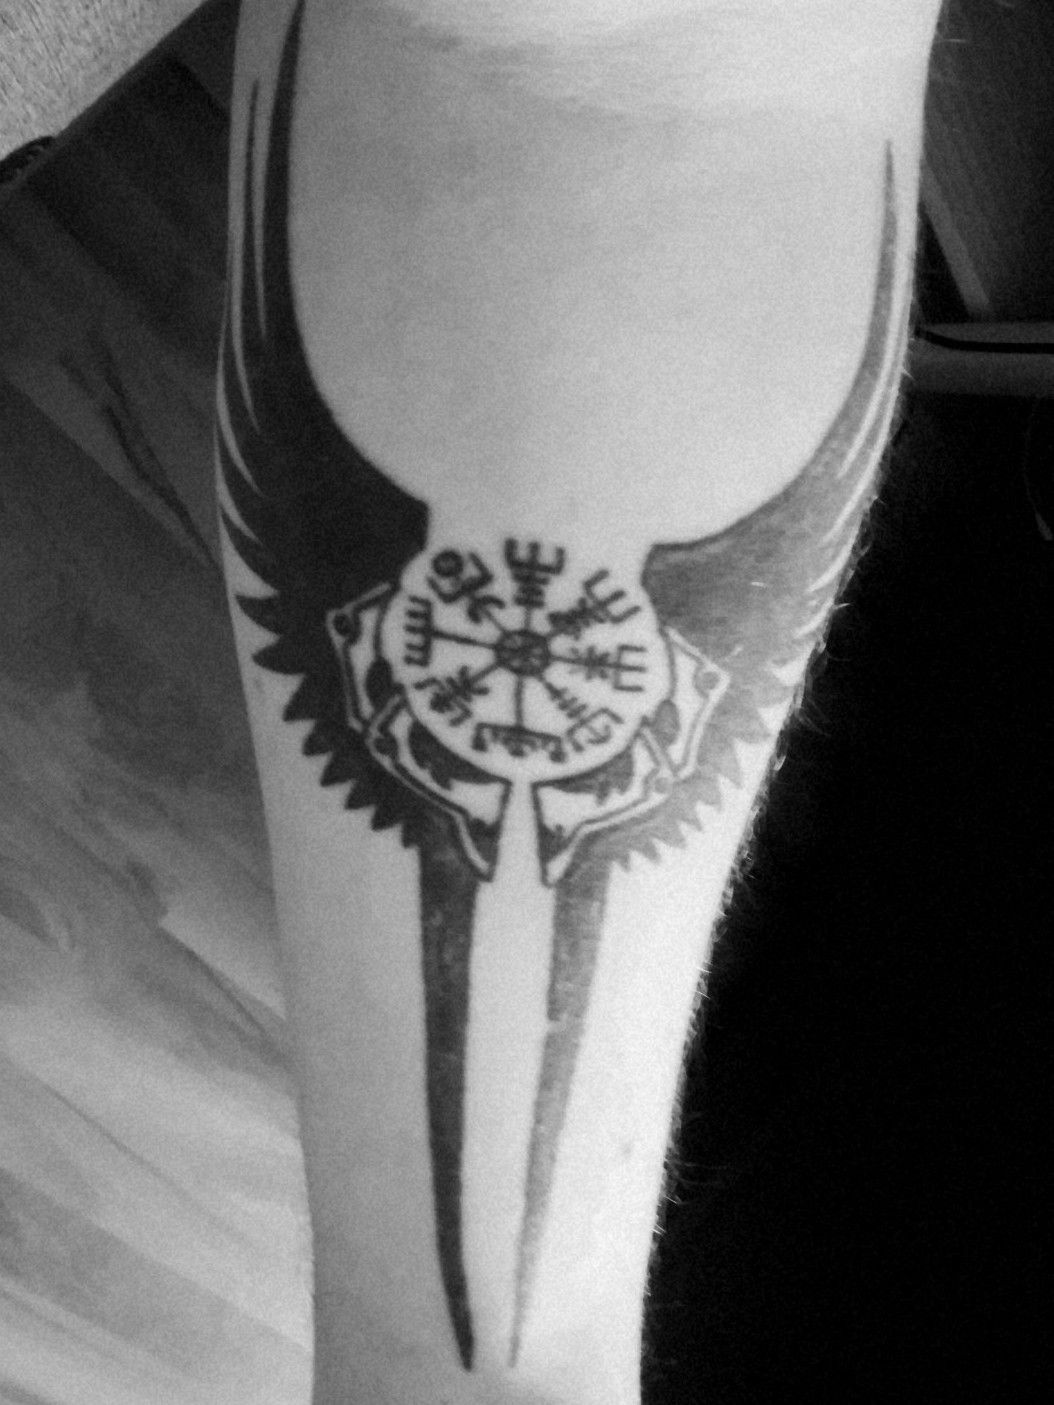 Valkyrie sword and wings done  Euphoria Body Piercing  Tattoo in  Vancouver WA by Peachie Porkchop  rtattoo